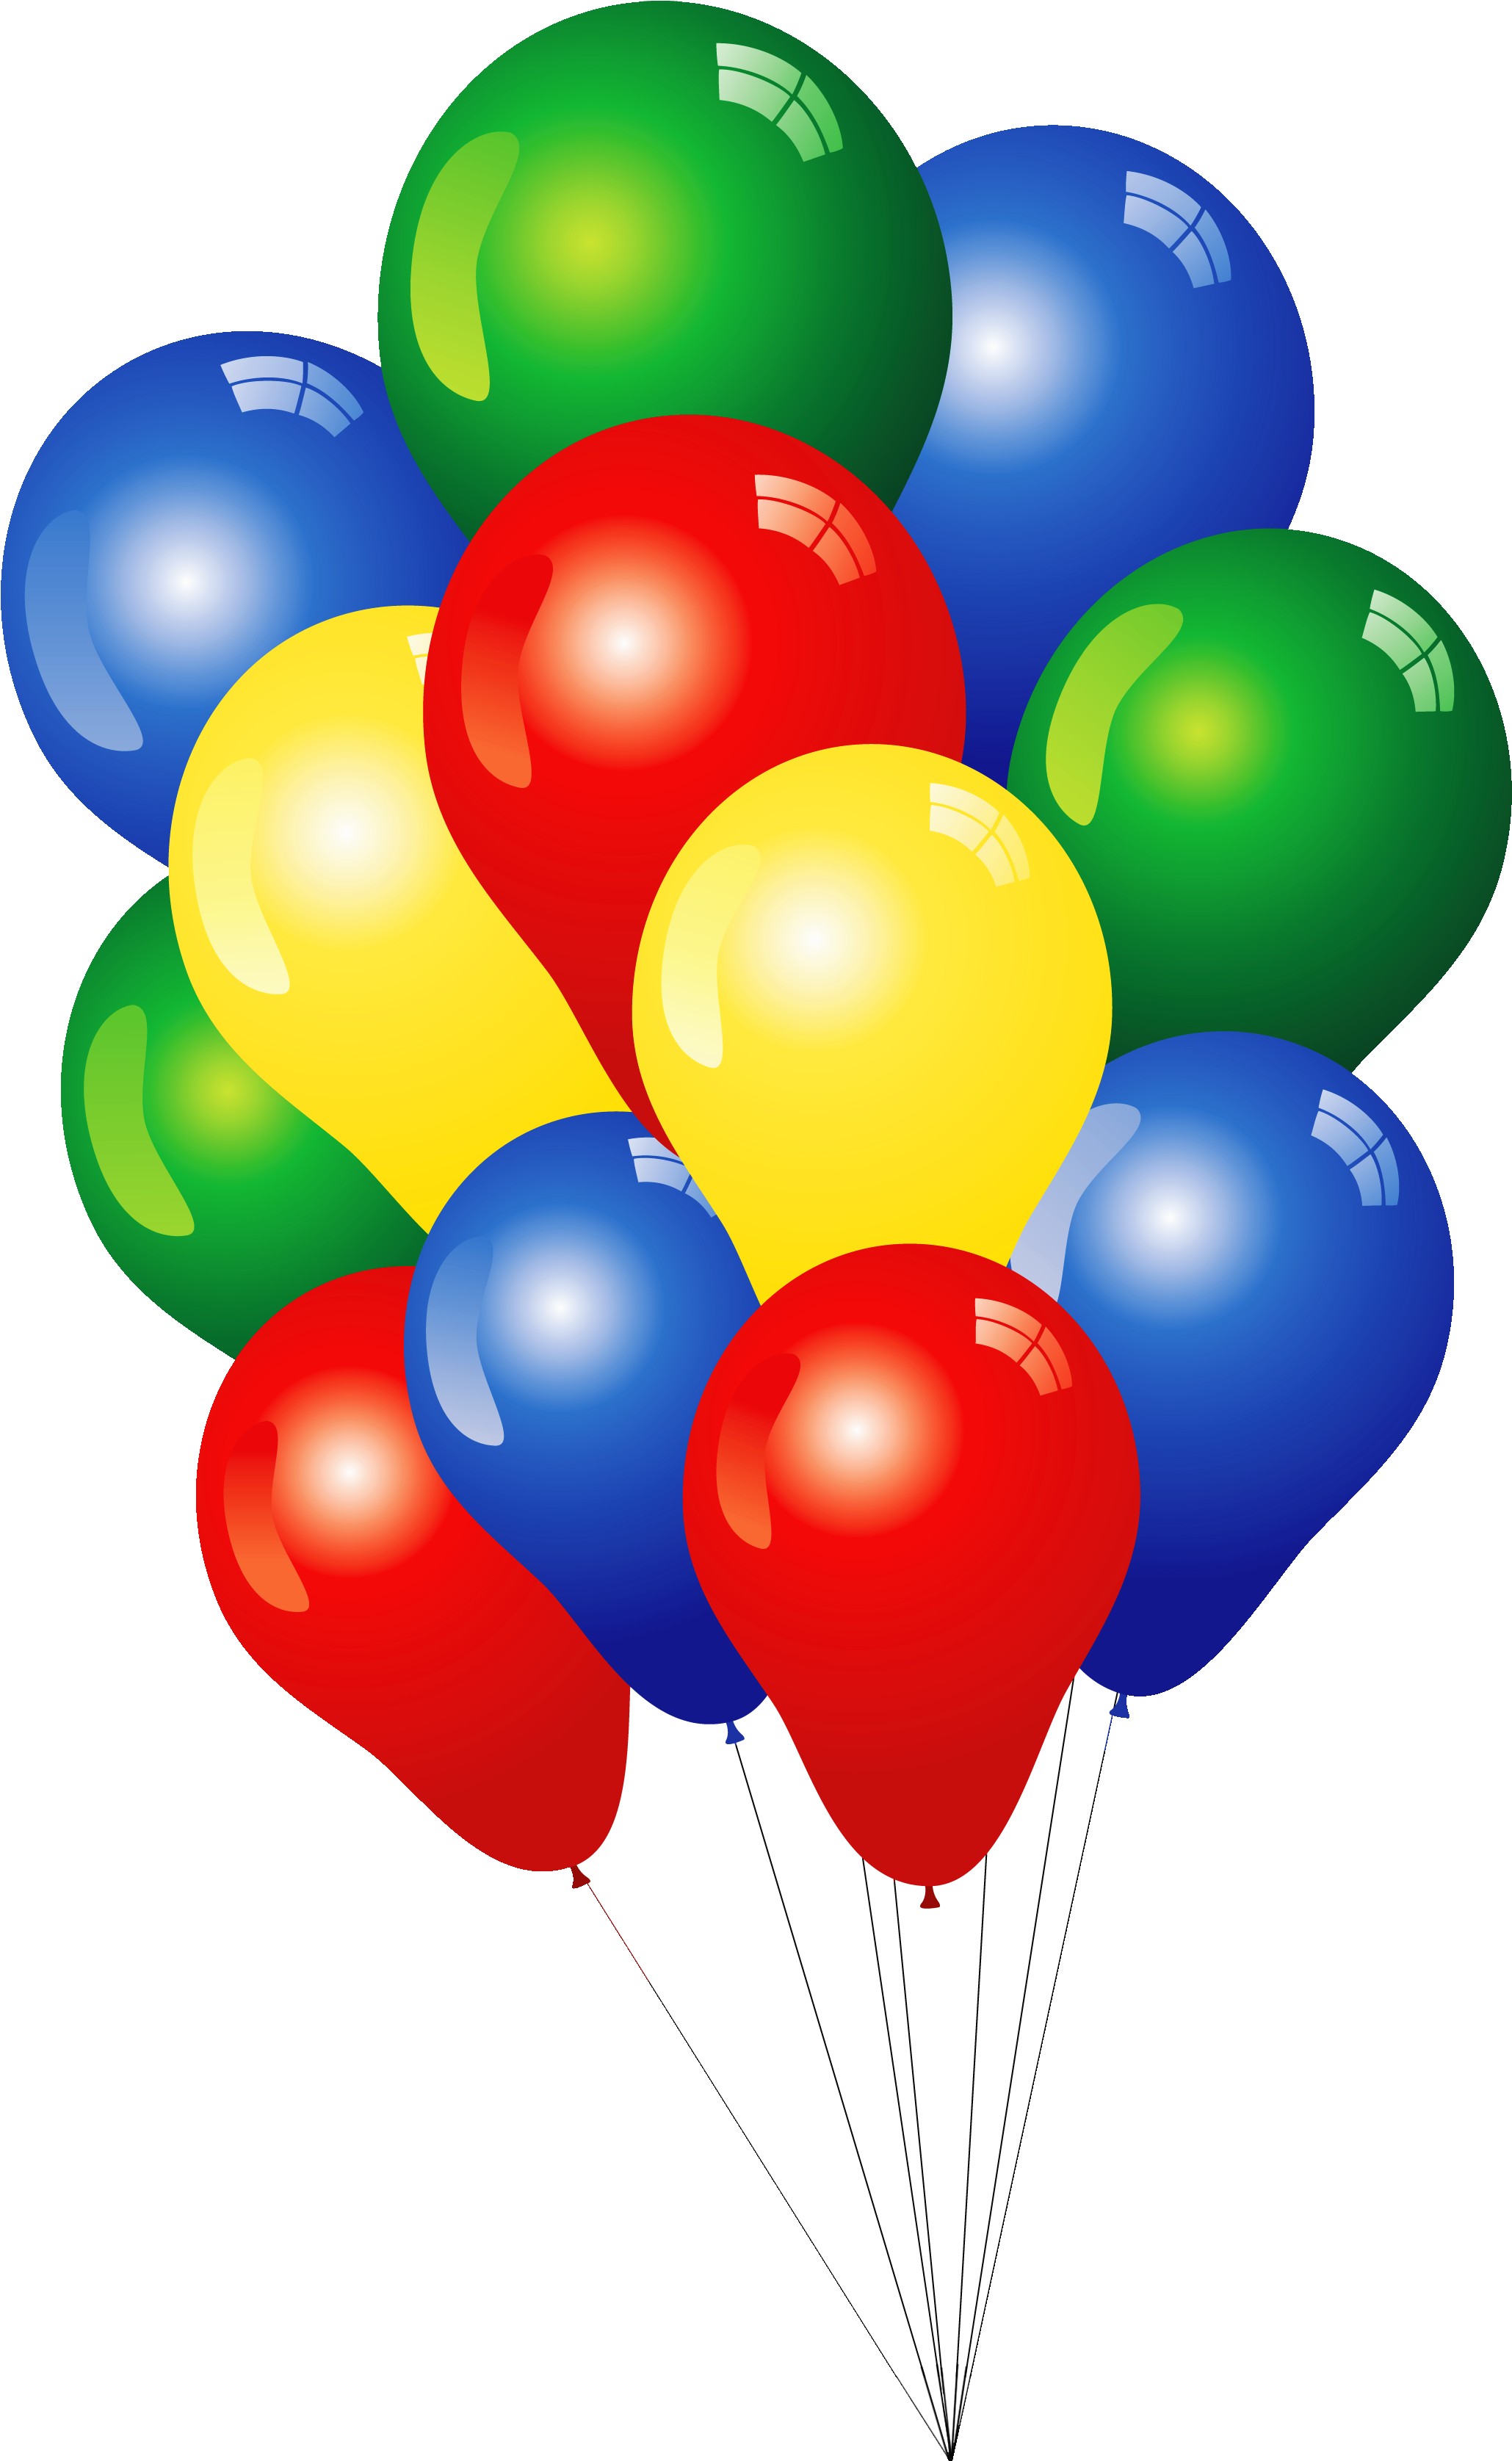 A Bunch Of Balloons On A Black Background